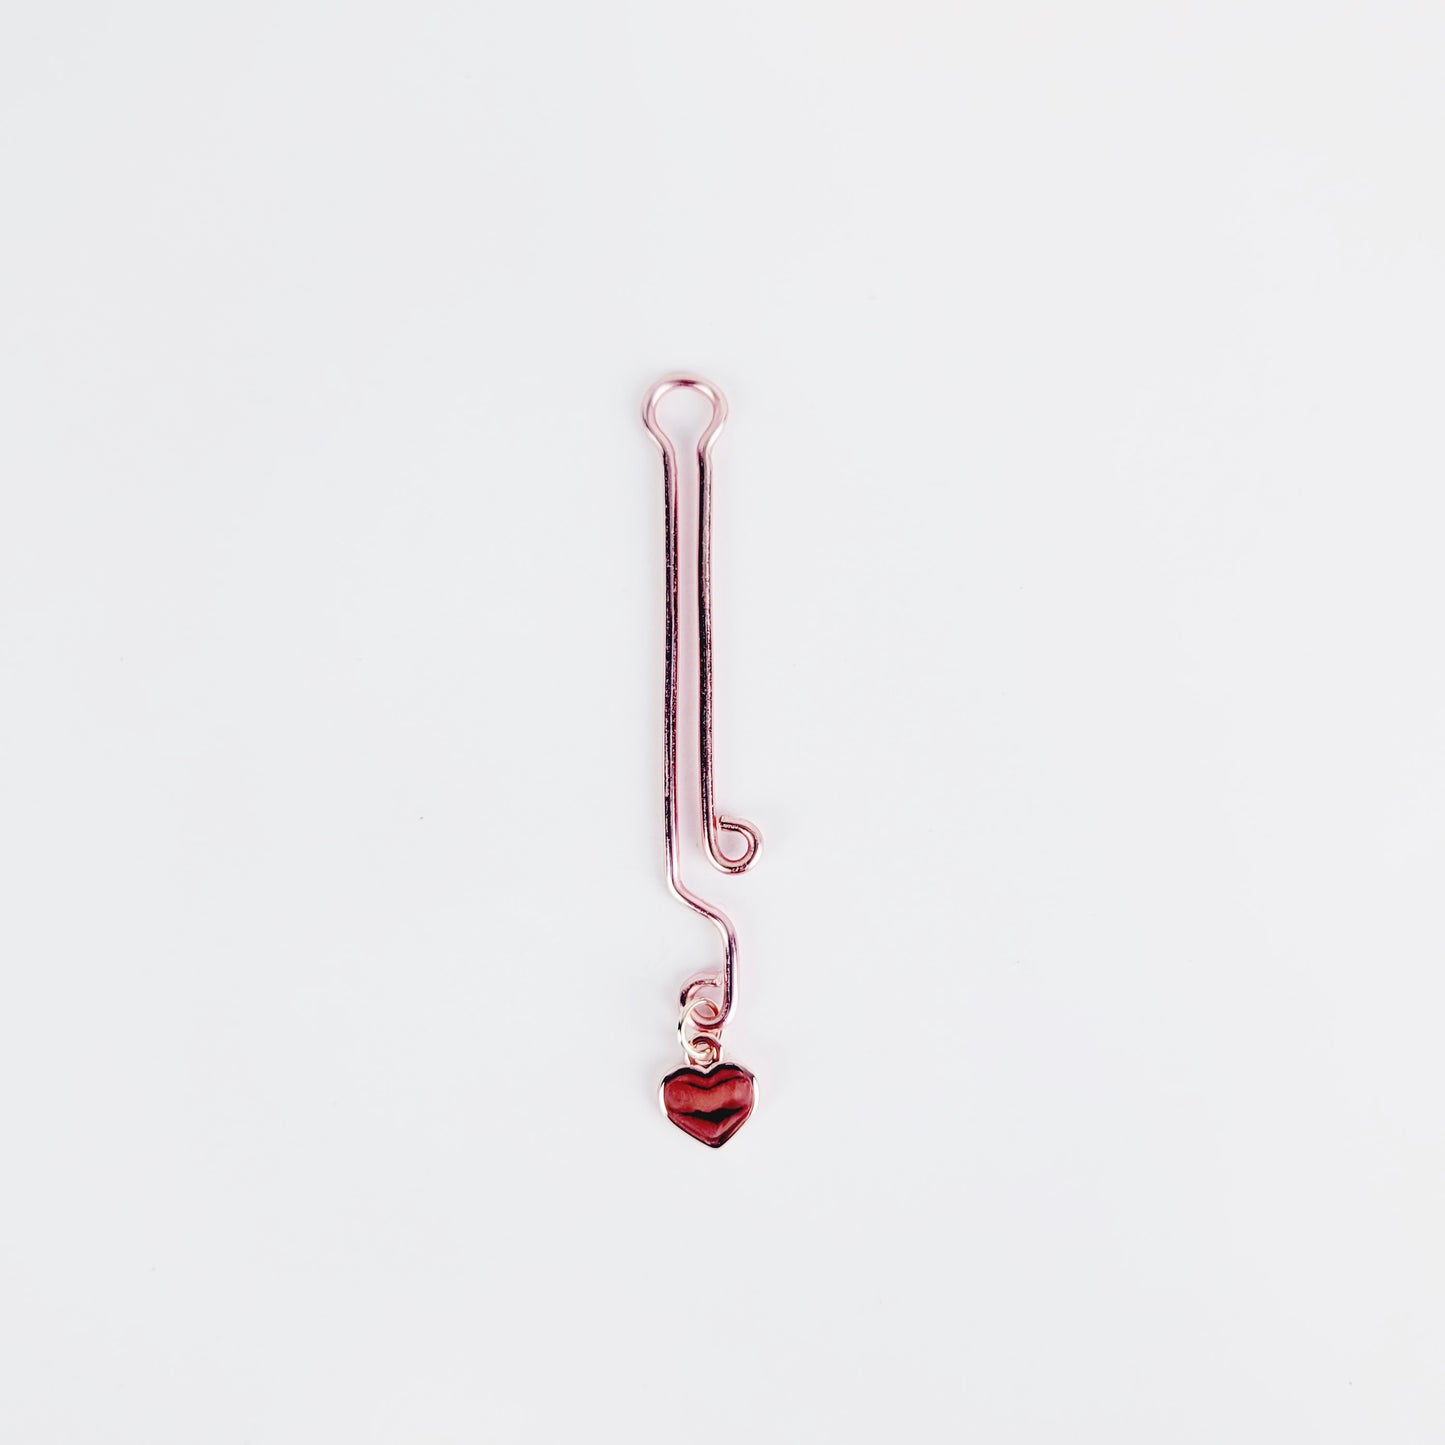 Labia Jewelry Clip with Heart, Rose Gold. Non Piercing Intimate Vaginal Jewelry.